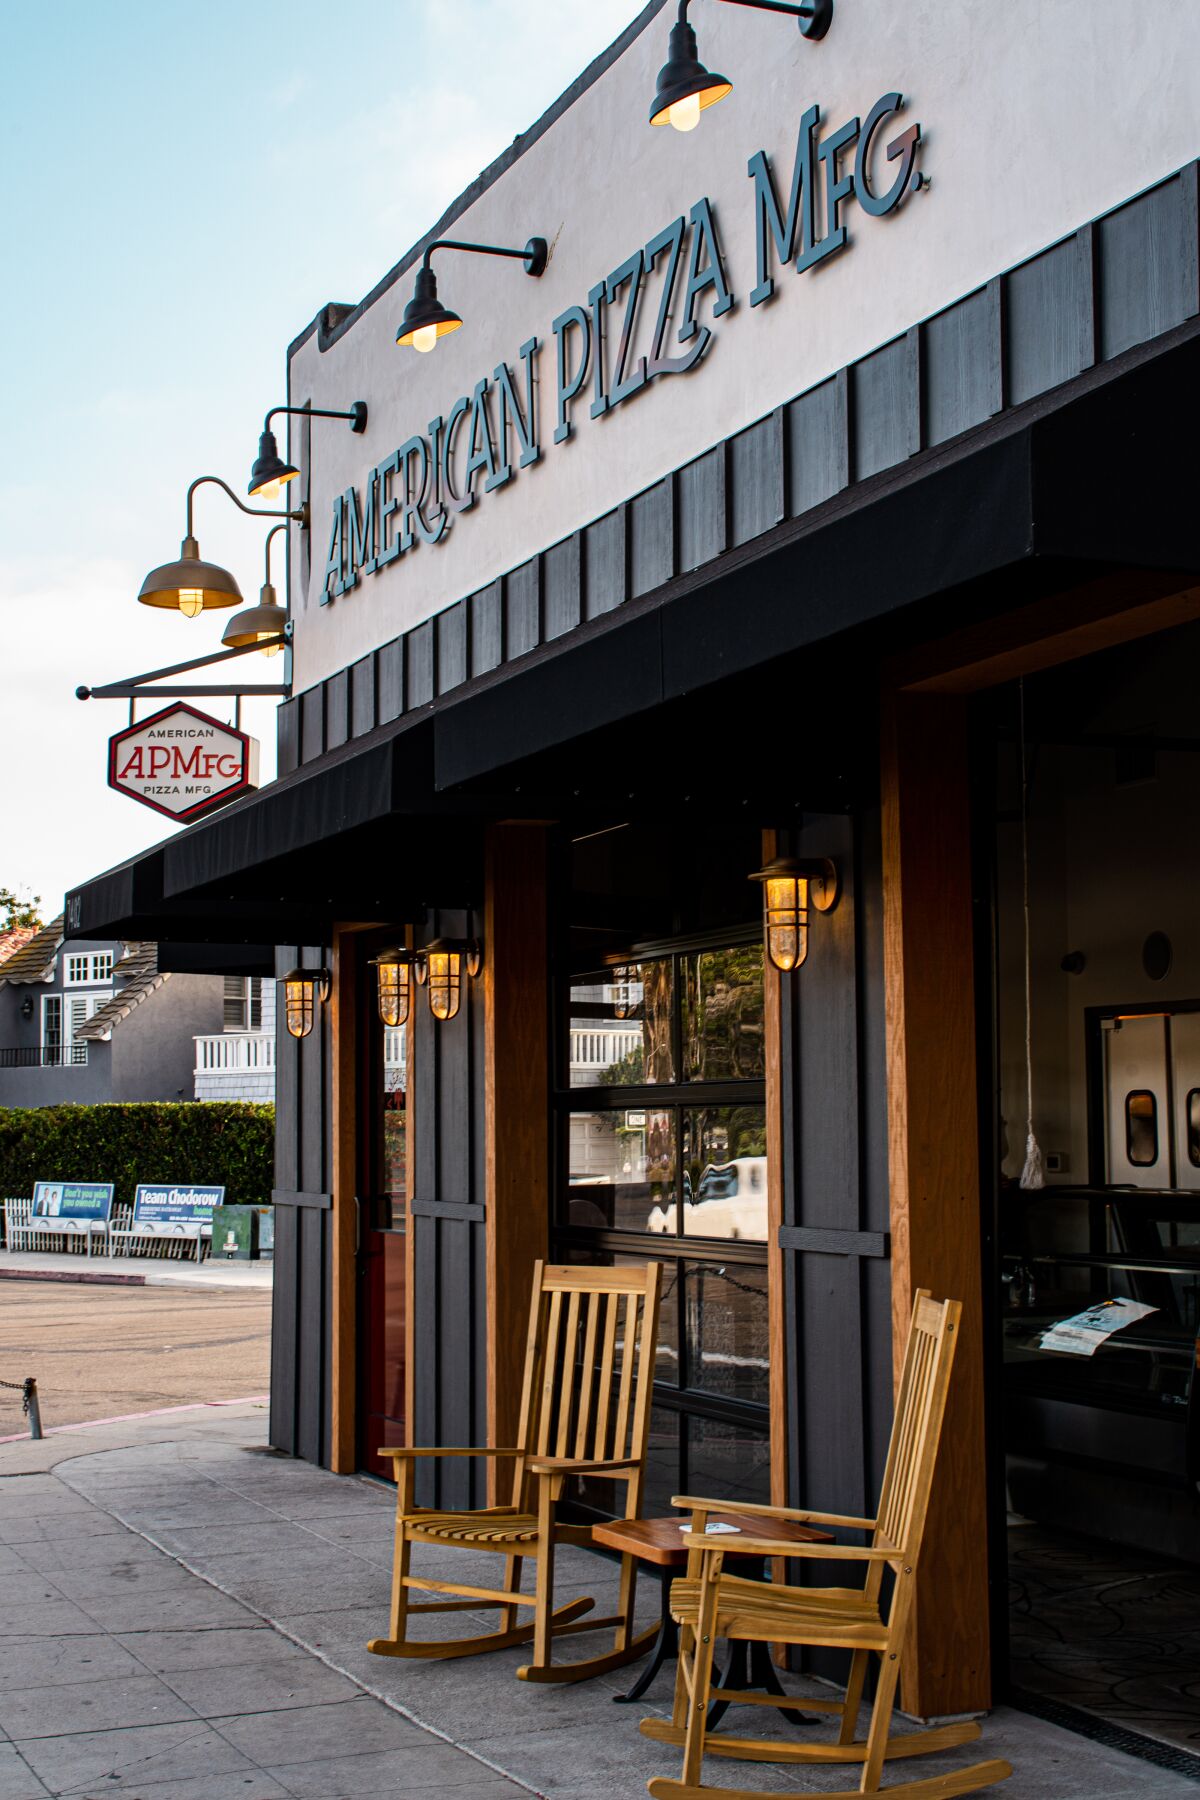 American Pizza Mfg. at 7402 La Jolla Blvd. offers freshly assembled pizzas and more to take and cook at home.